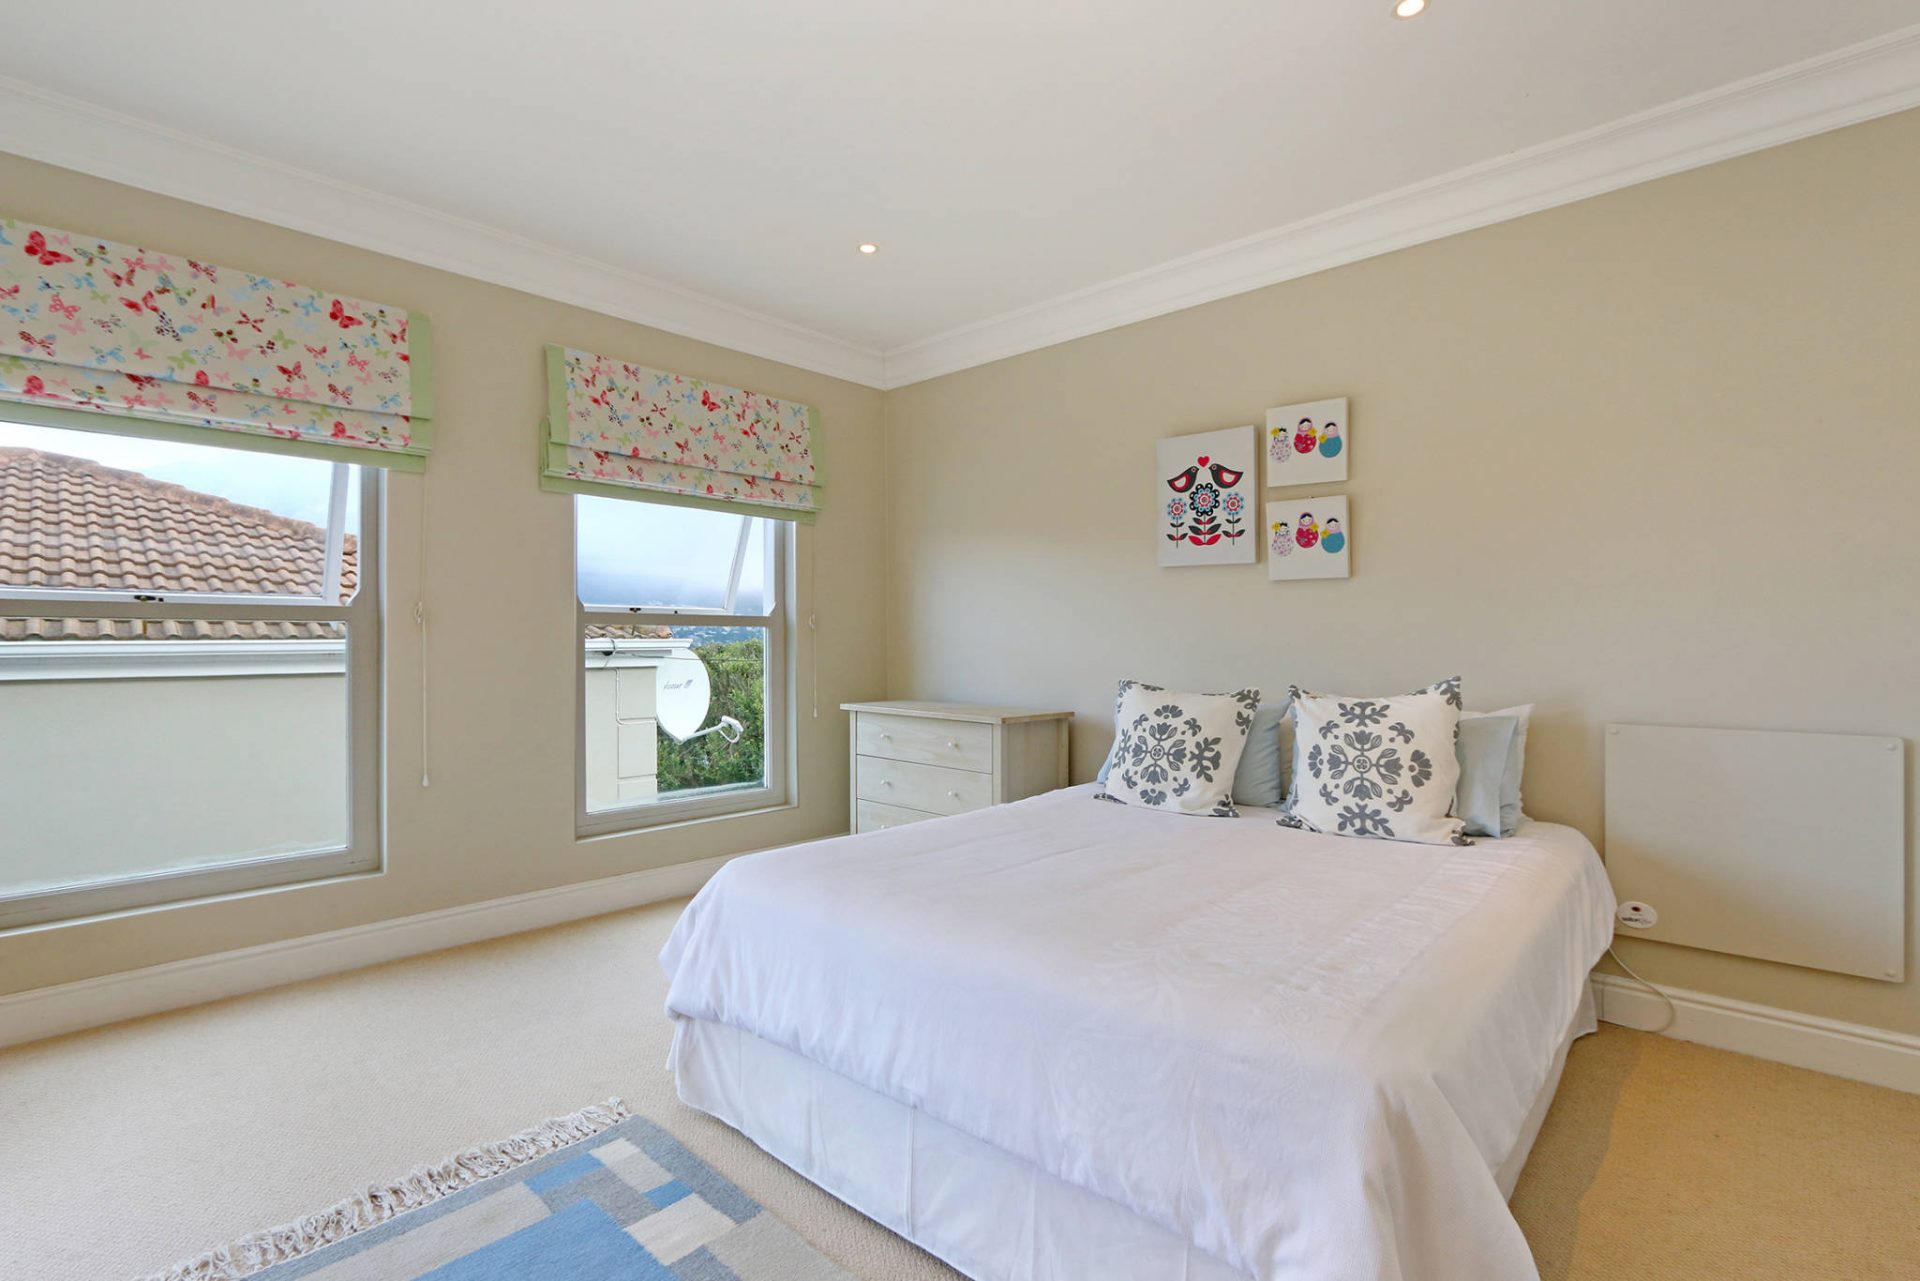 Photo 5 of King Street Villa accommodation in Hout Bay, Cape Town with 3 bedrooms and 2 bathrooms